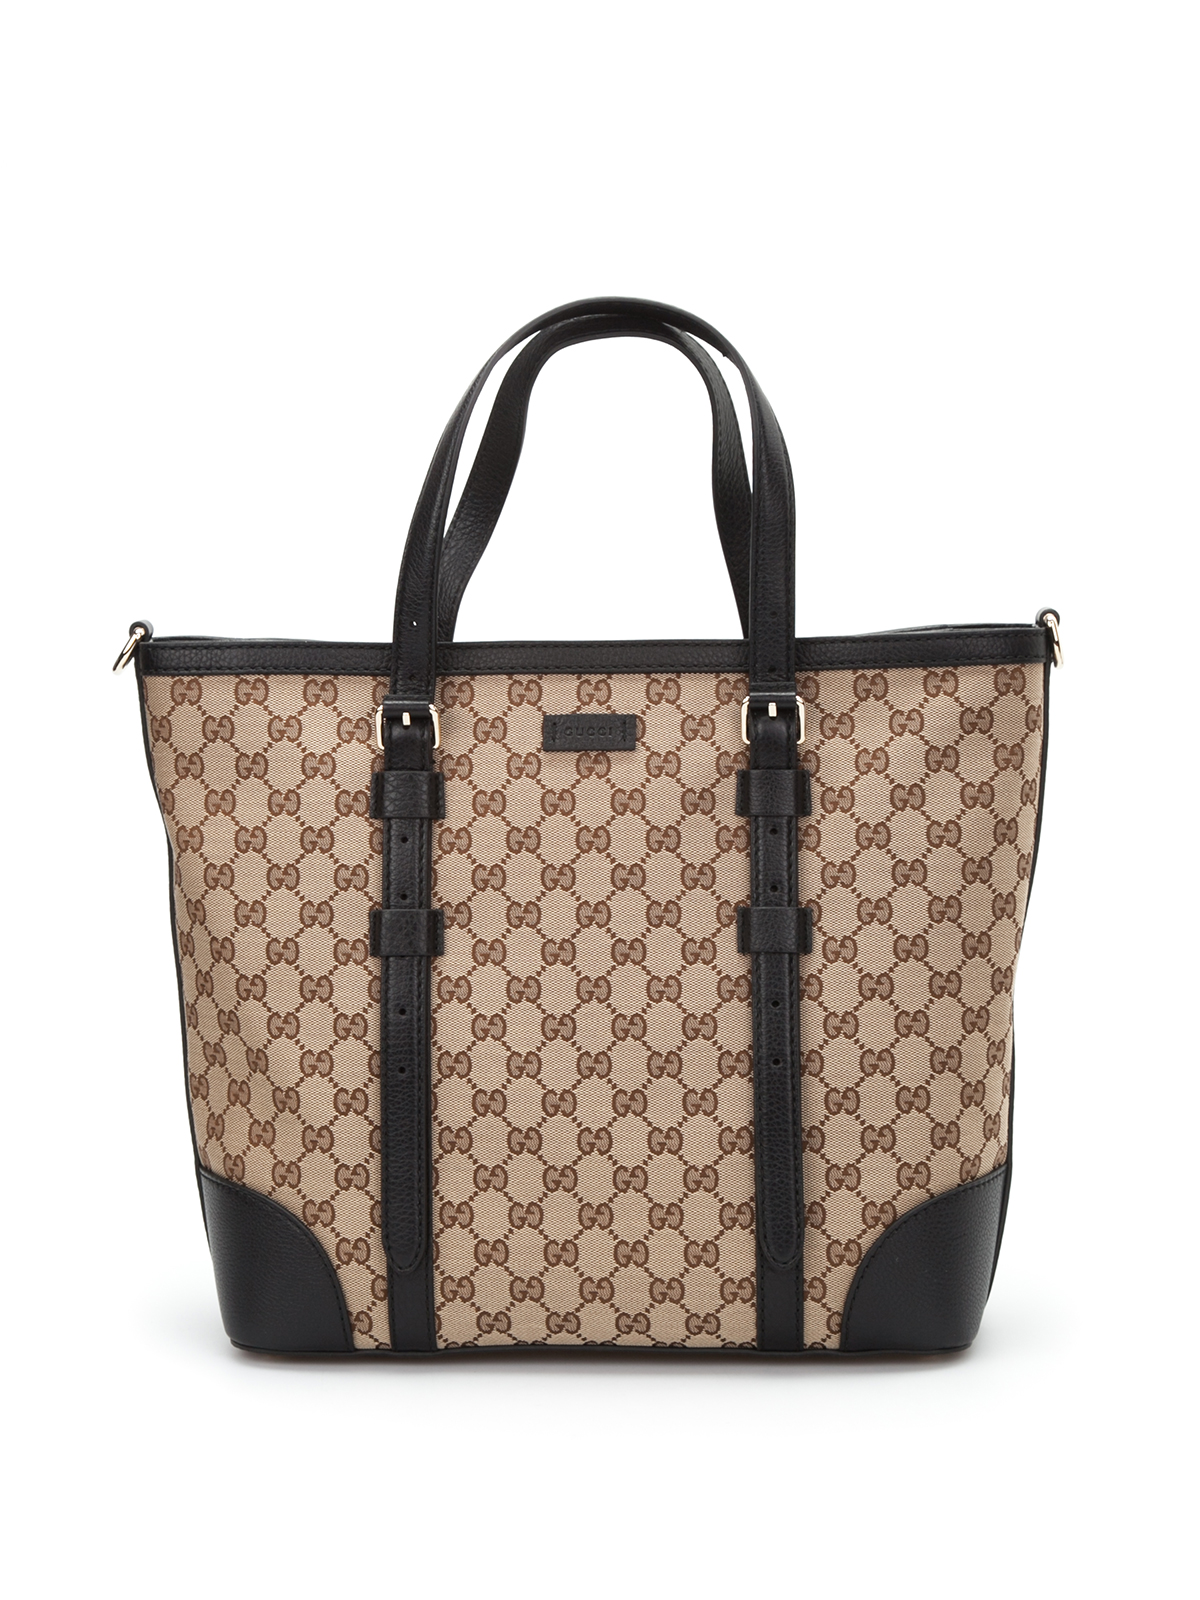 Gucci - GG classic tote - totes bags - 387602KQW1G9769 | 0